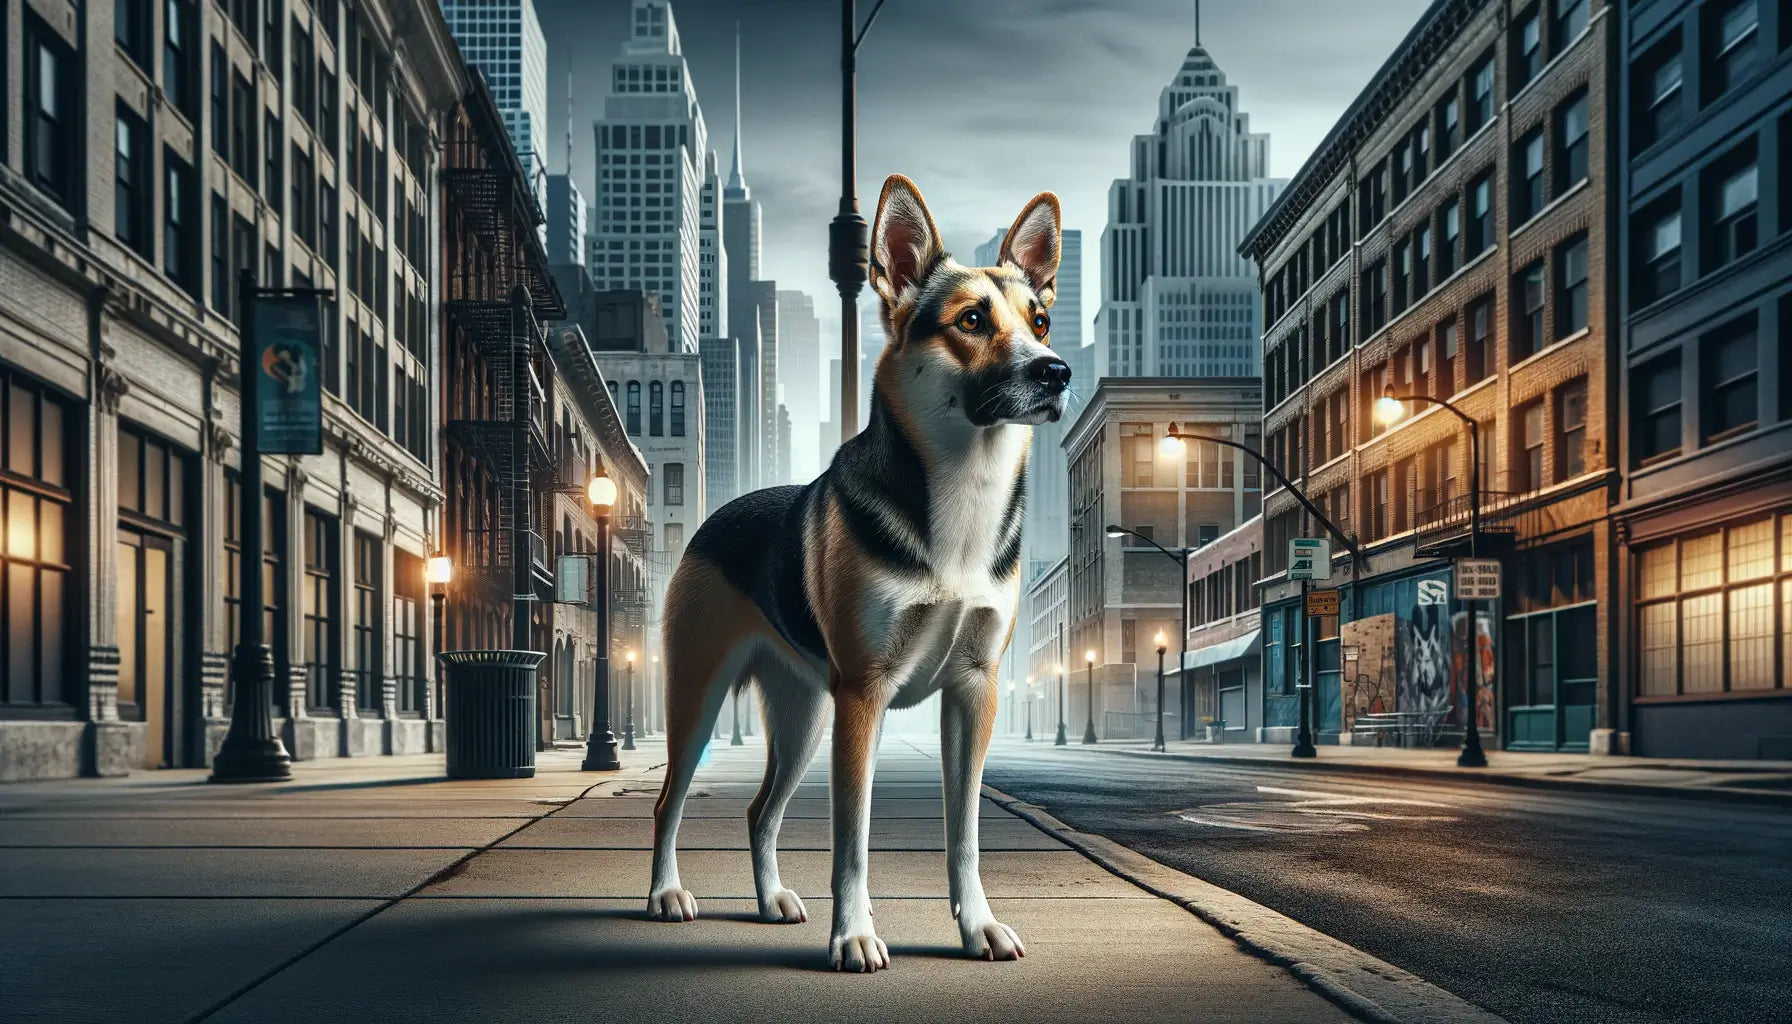 Potcake Dog in an urban setting, with the dog's athletic build and alert expression emphasizing its adaptability and keen senses.